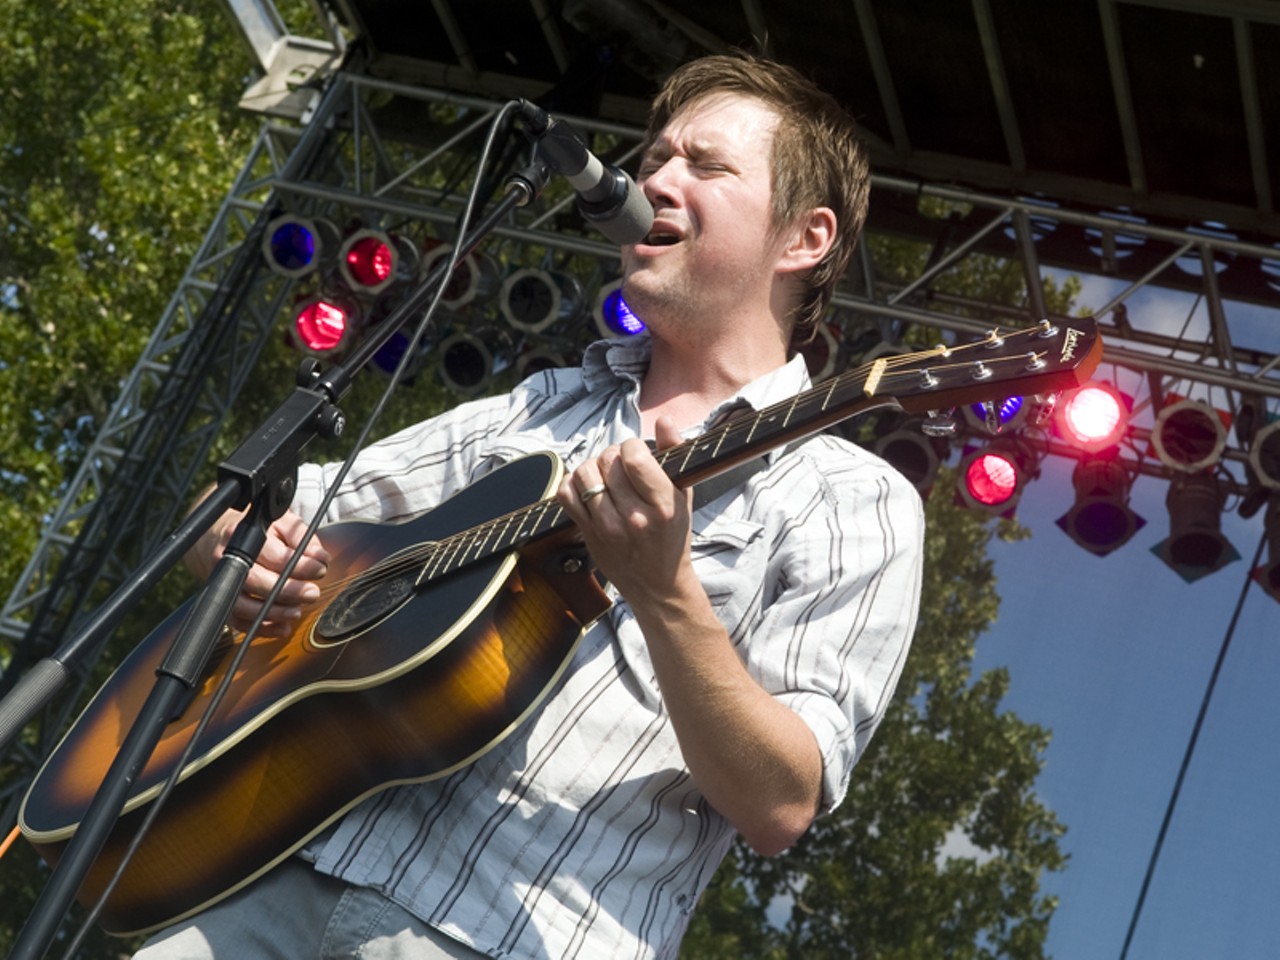 Adam Reichmann performing at the LouFest.